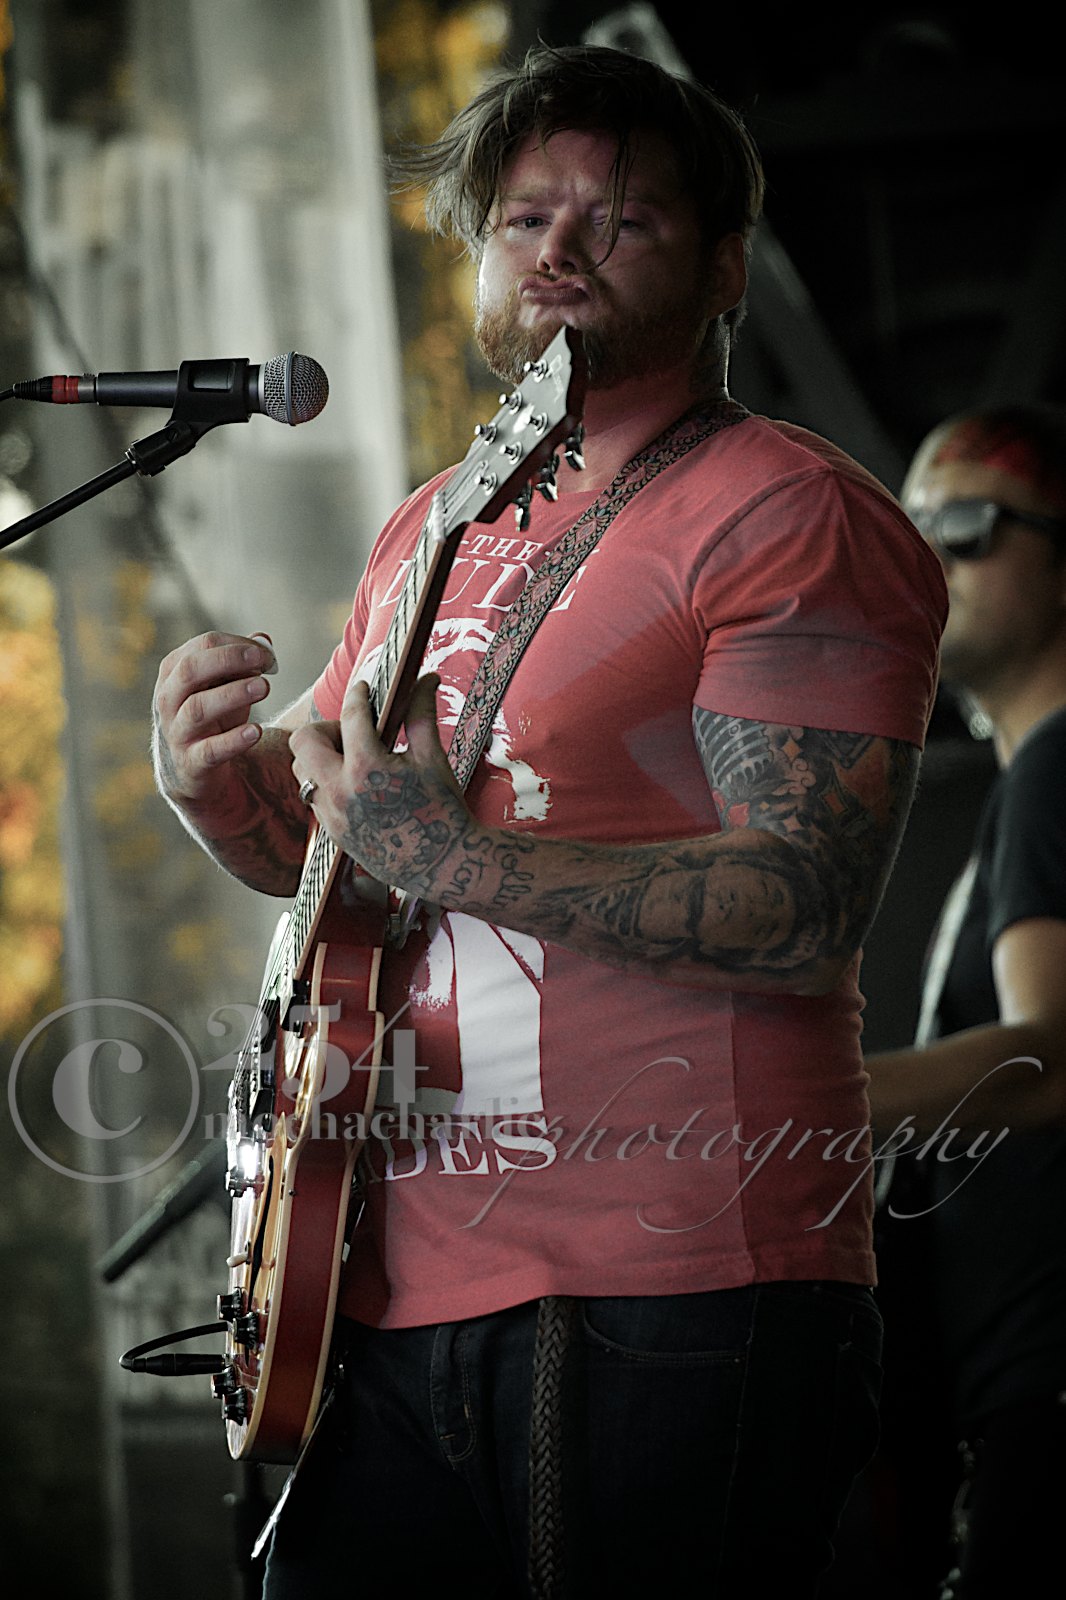 Sons of Revelry at Uproar (Photo by Mocha Charlie)